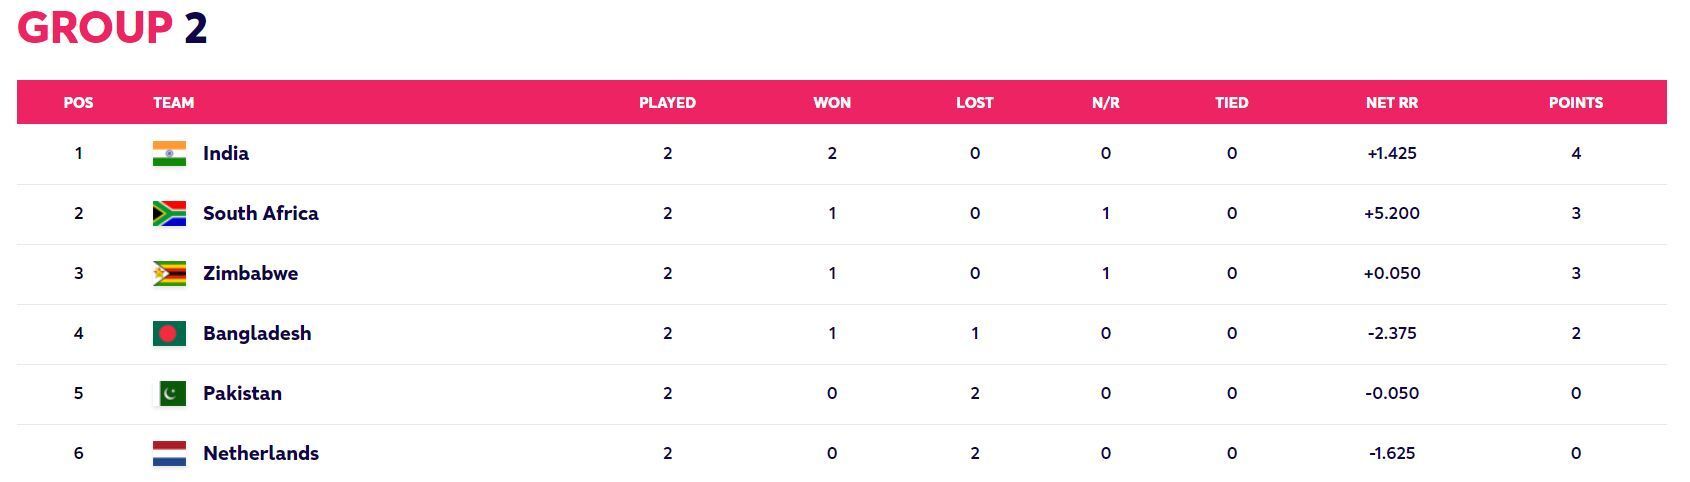 Updated Points Table after Match 24 of the T20 World Cup (Image Courtesy: www.t20worldcup.com)